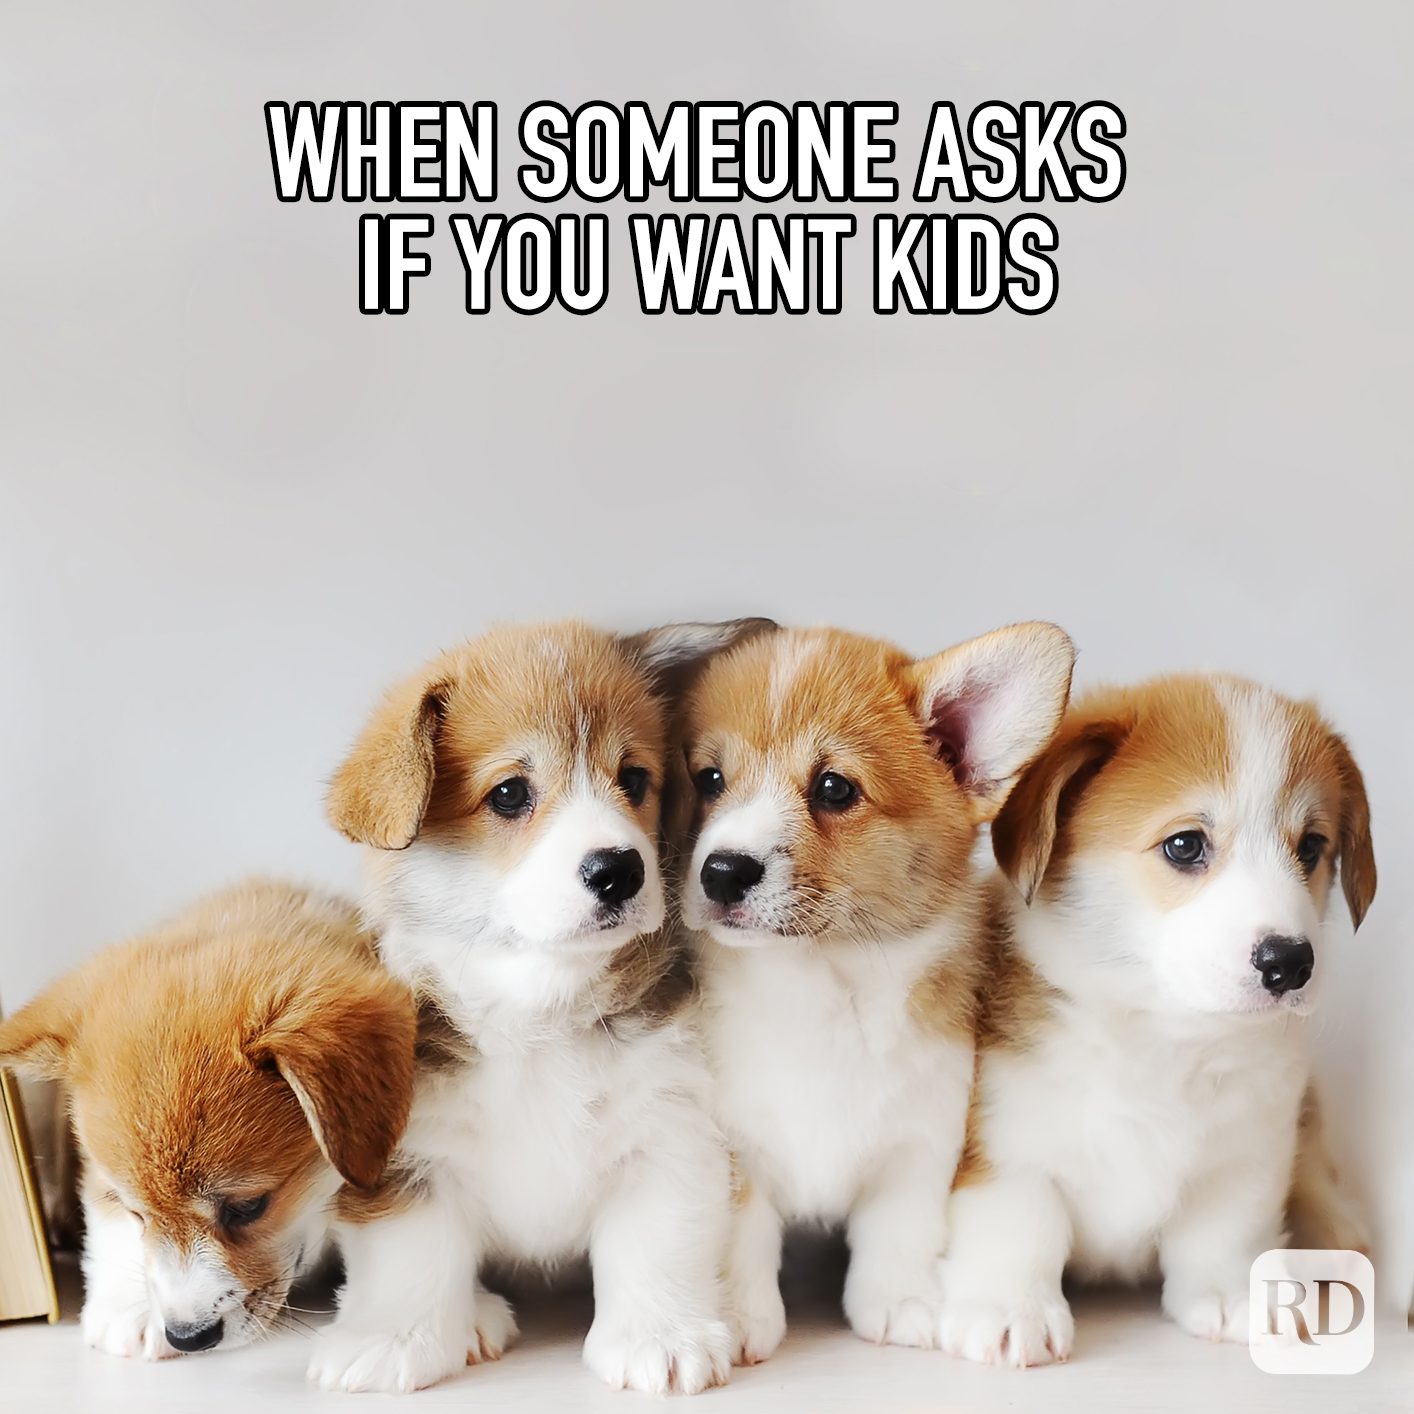 When Someone Asks If You Want Kids meme text over group of corgi puppies